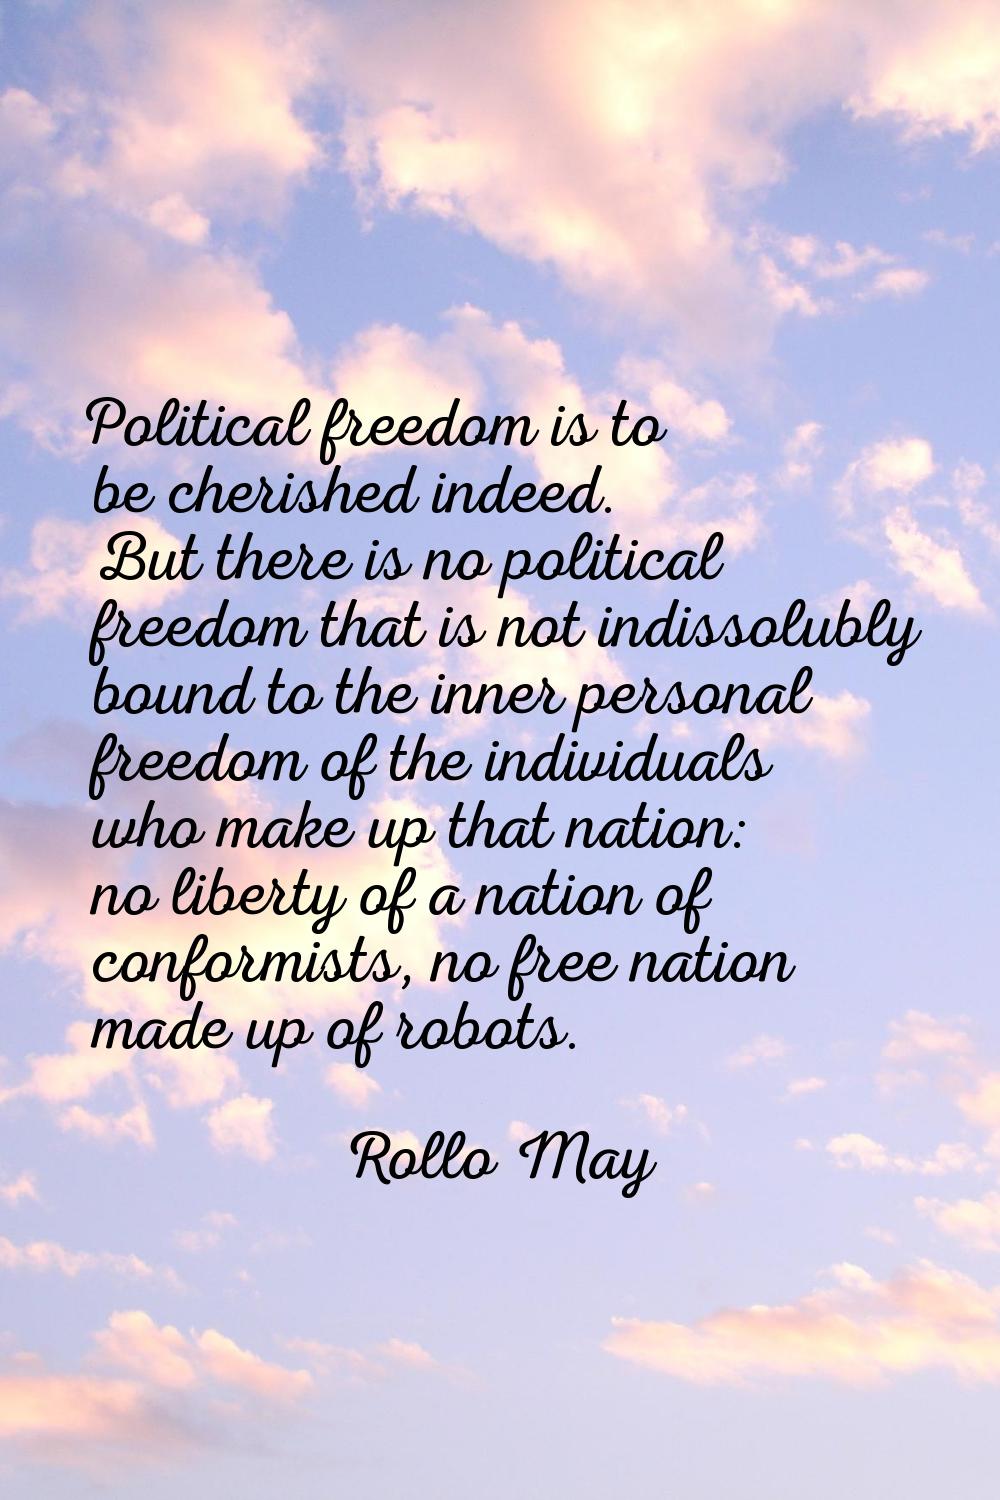 Political freedom is to be cherished indeed. But there is no political freedom that is not indissol